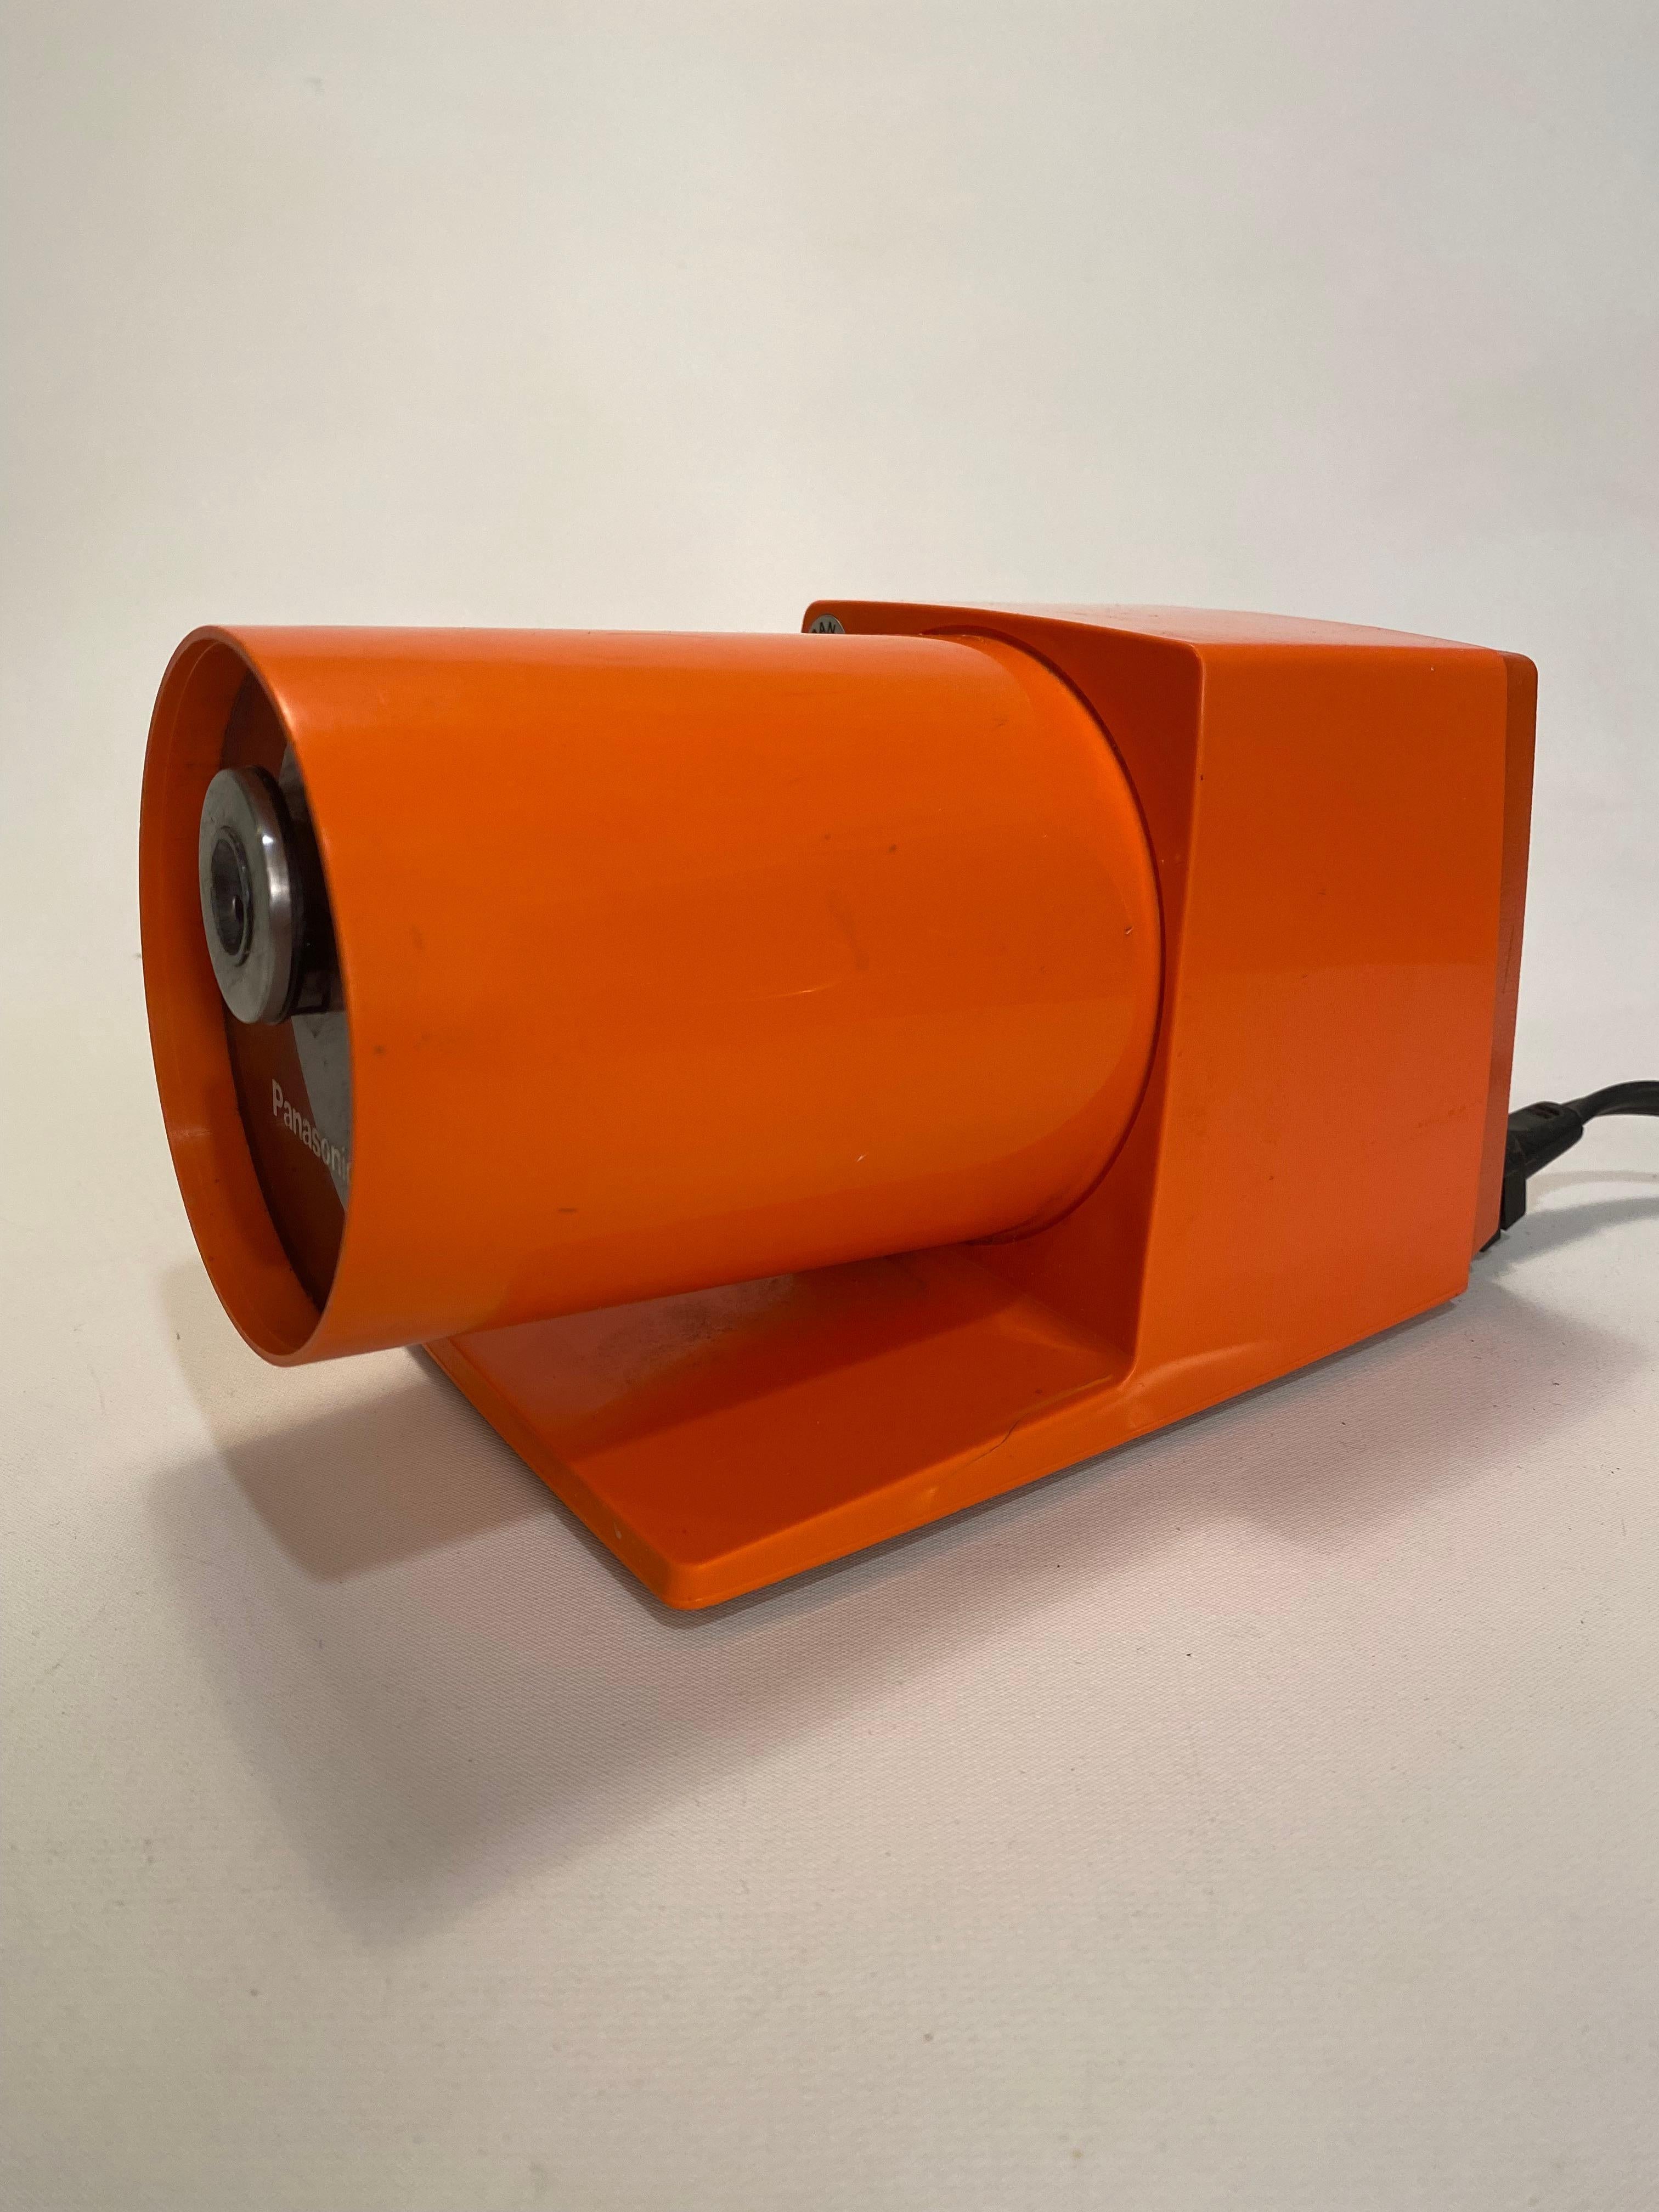 The best desk or table top Mid-Century Modern electric pencil sharpener. The KP-22A model by Panasonic, circa 1965-70. Made in Japan. Modern lines and profile. Sculptural hard plastic bright orange casing with a pull out compartment for the pencil